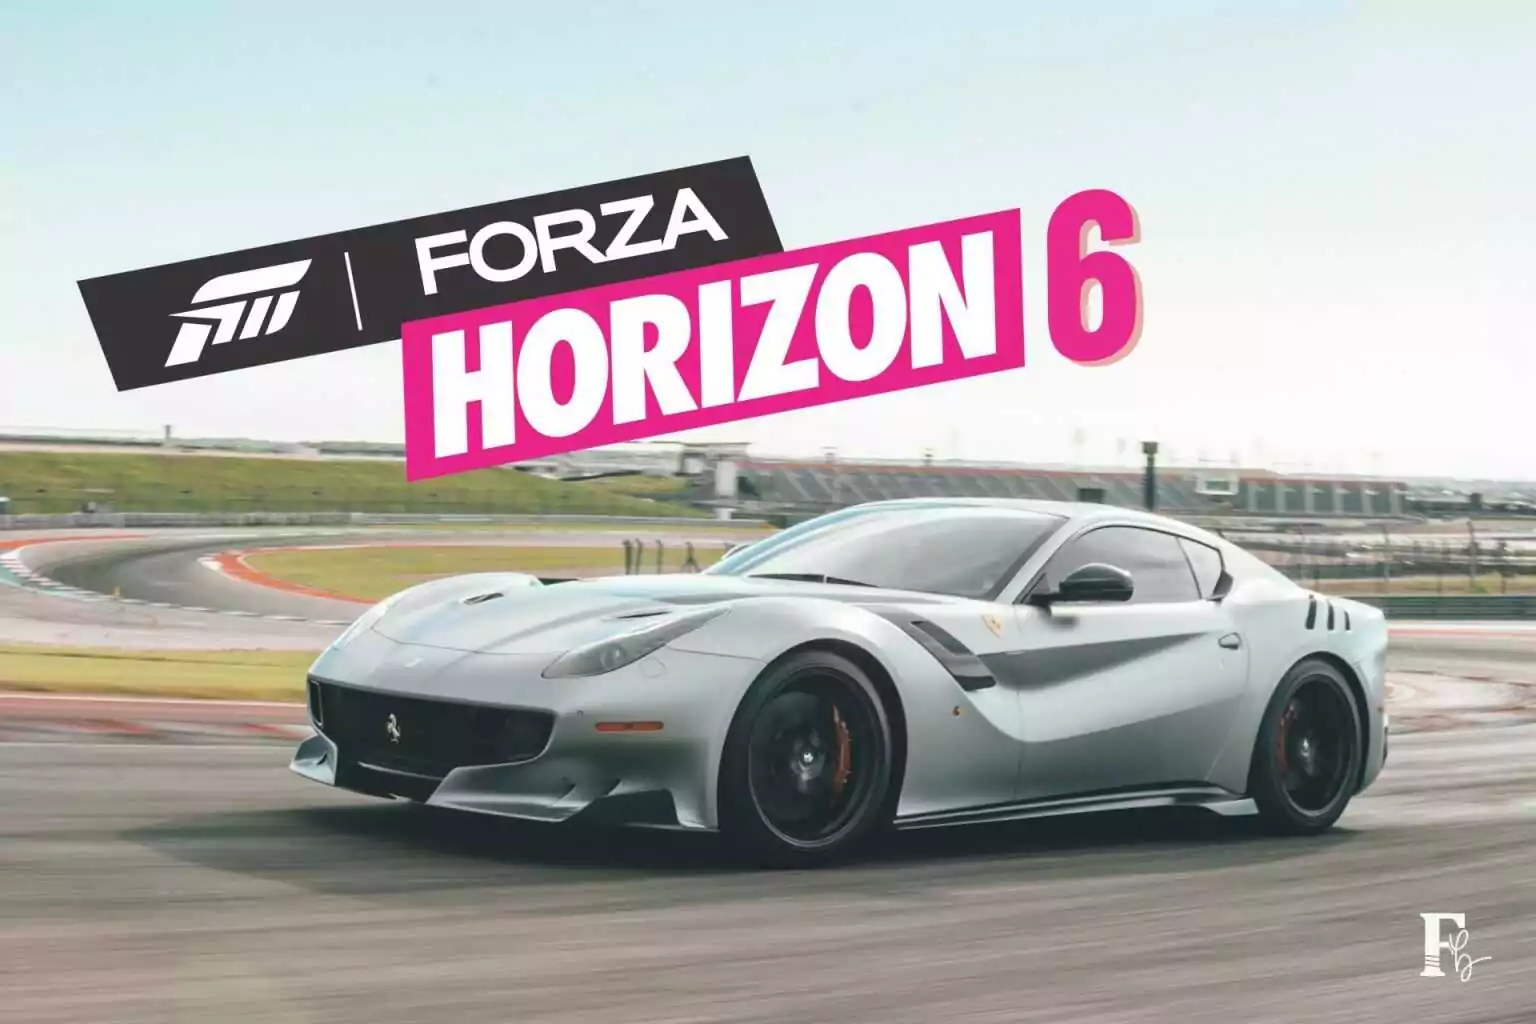 Forza Horizon 6 - Latest News, Possible Release, Expectations